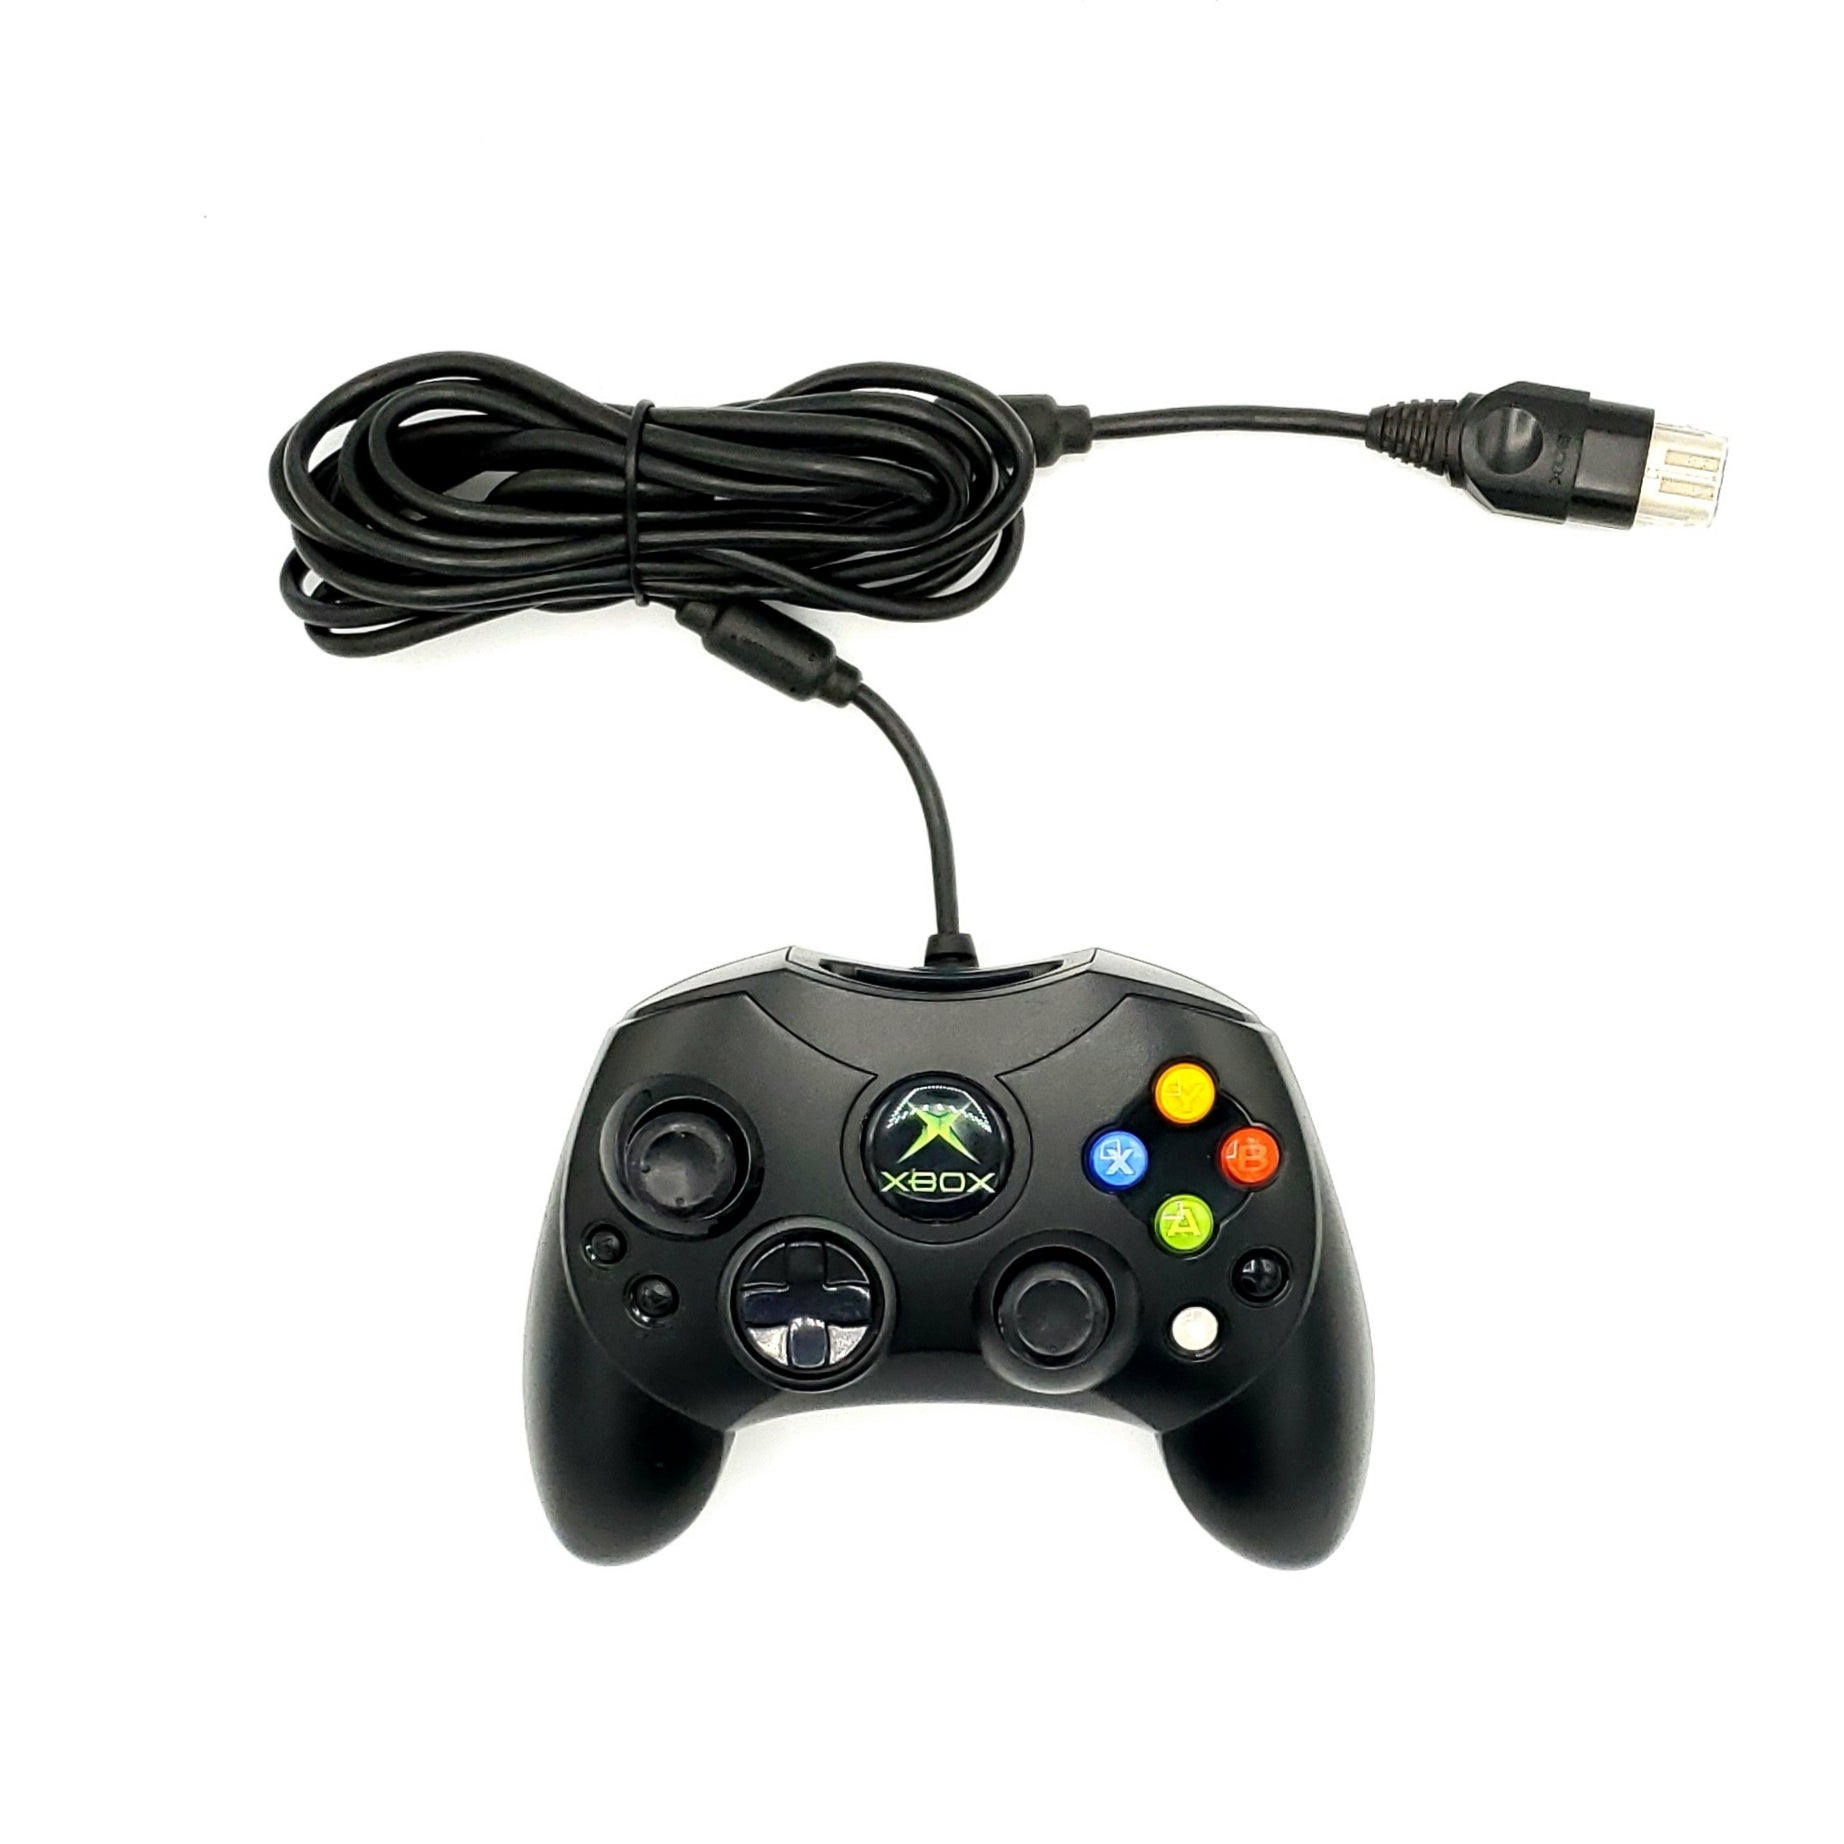 Microsoft Xbox Controller S - YourGamingShop.com - Buy, Sell, Trade Video Games Online. 120 Day Warranty. Satisfaction Guaranteed.